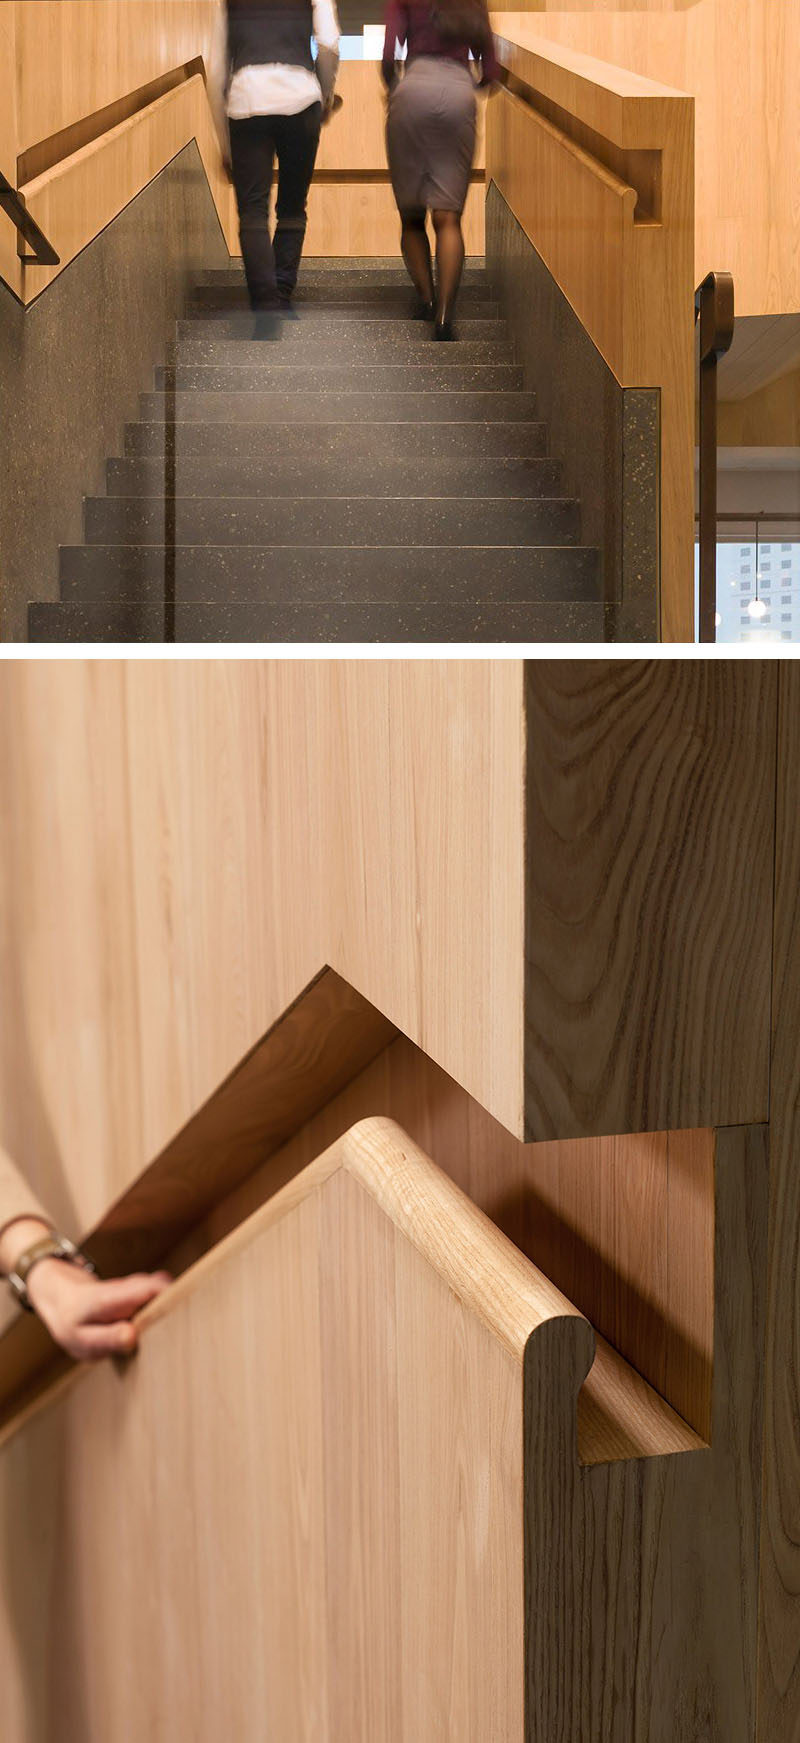 Stair Design Idea - 9 Examples Of Built-In Handrails // This office in Hong Kong transitioned from brass handrails into built-in wooden handrails.